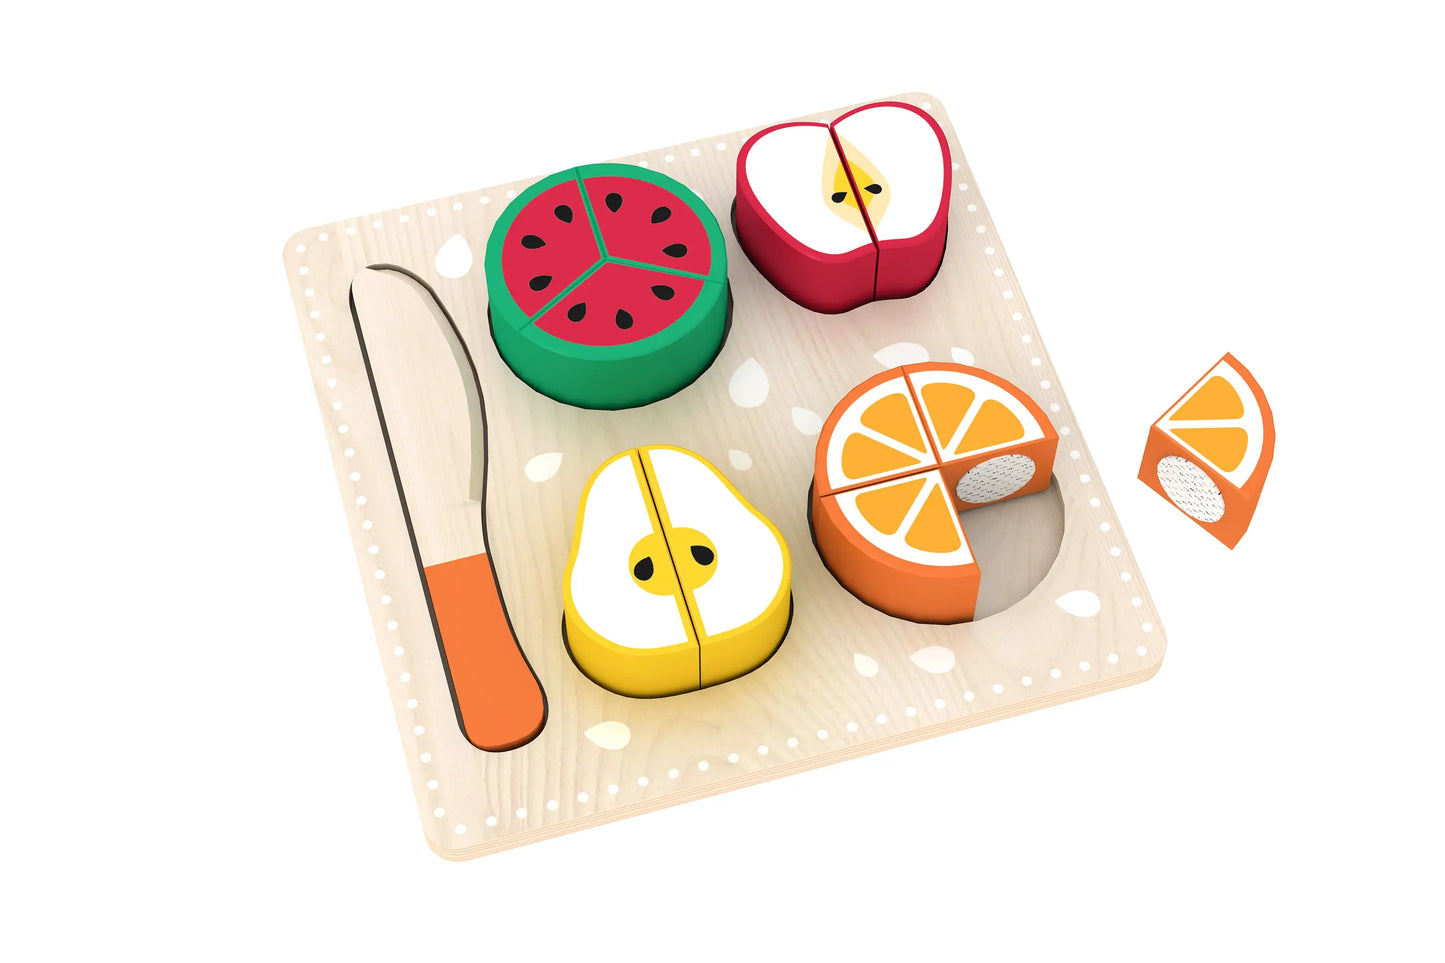 Wooden Cutting Play Food Sets